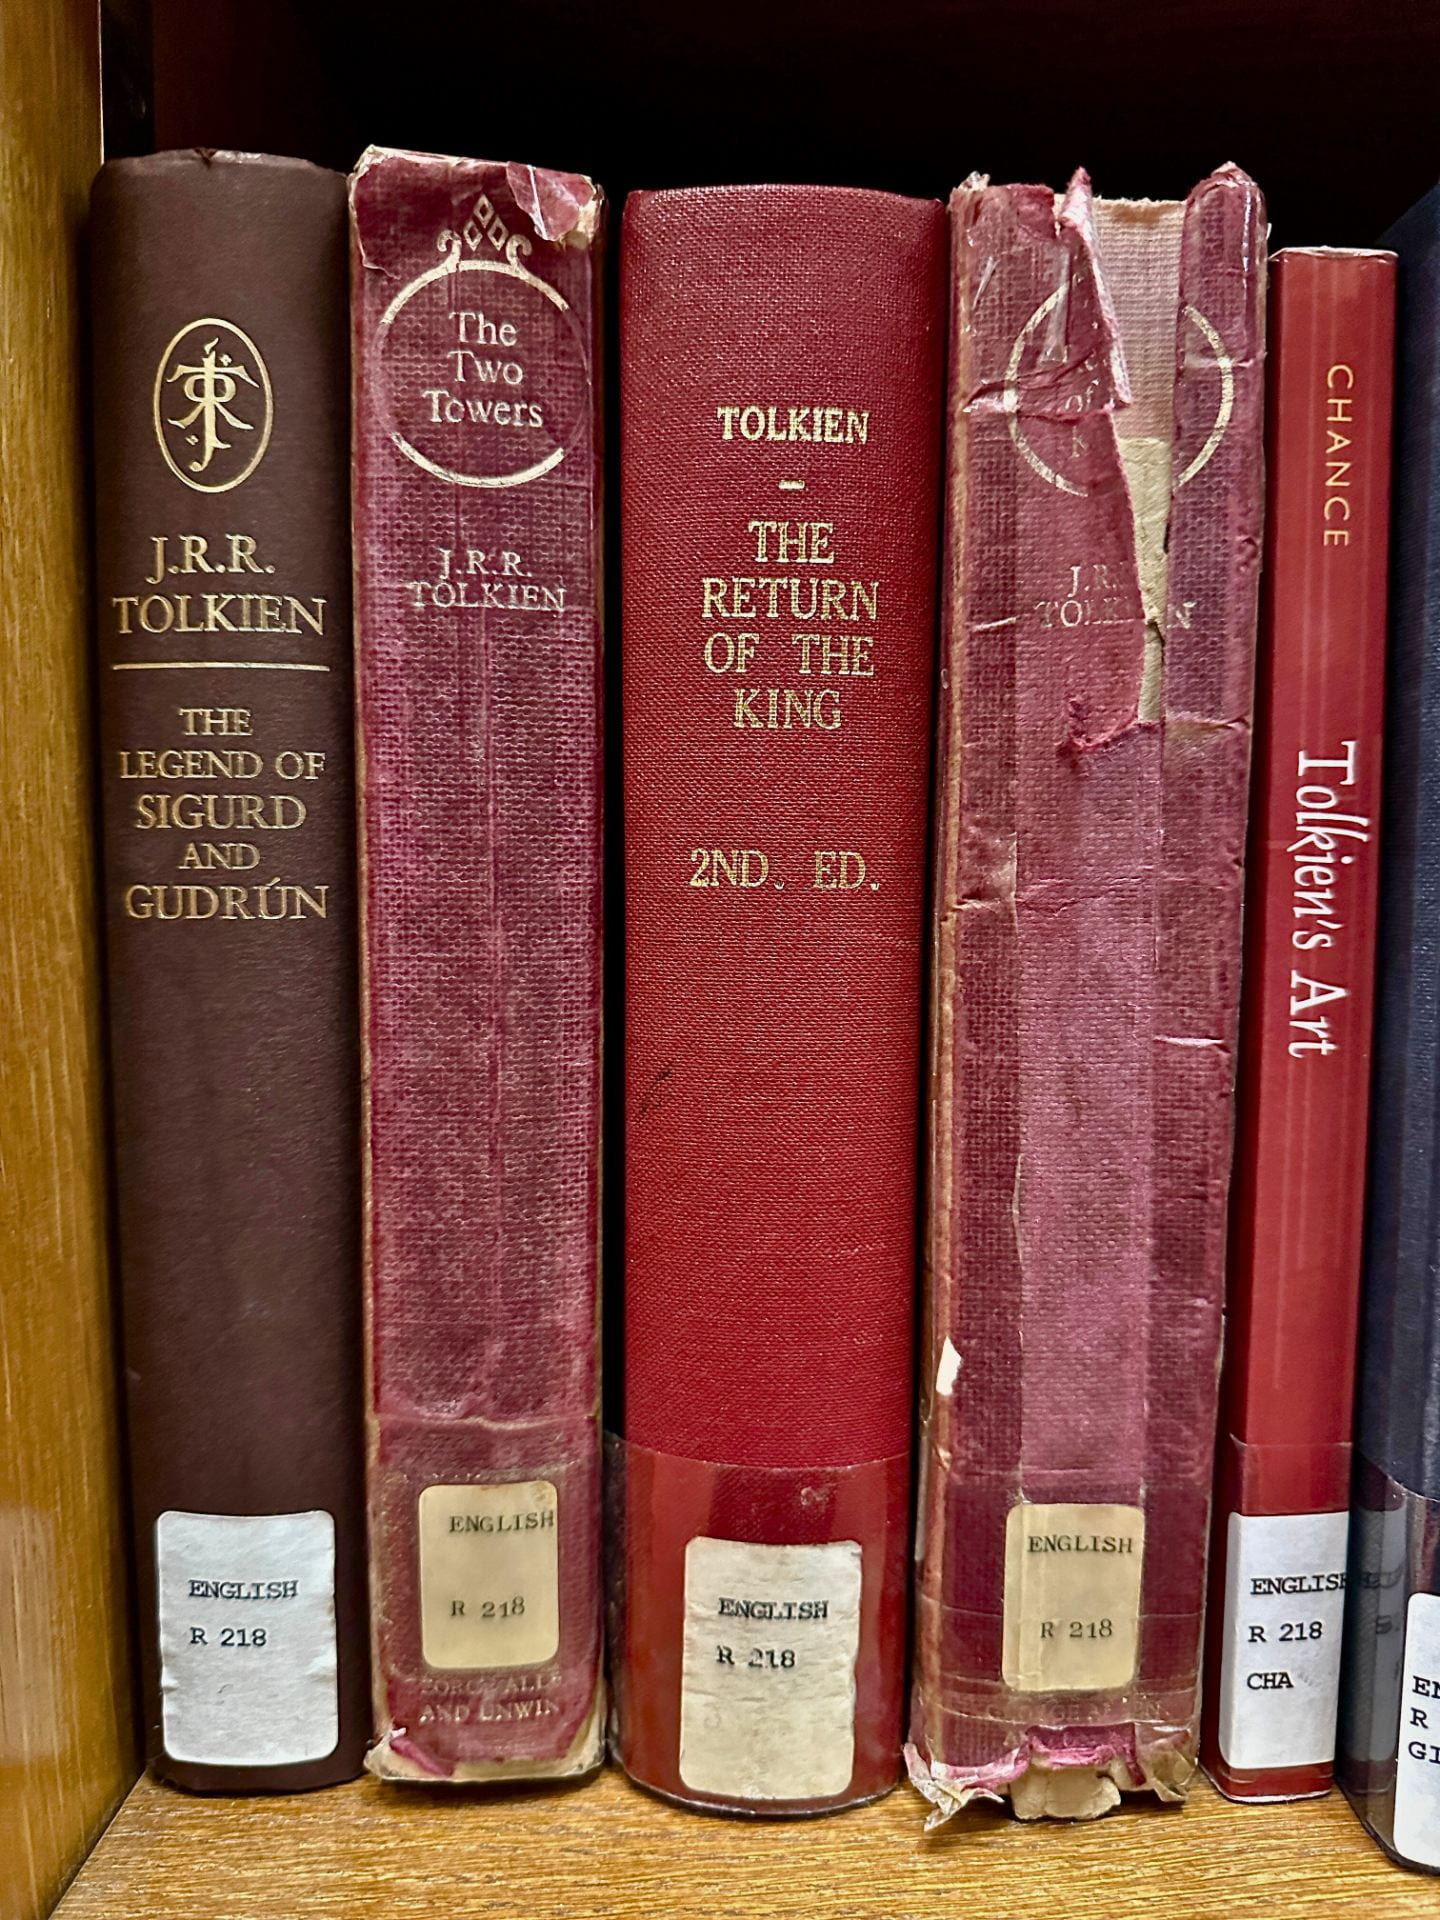 An image of JRR Tolkien's books on a shelf in the main library. 